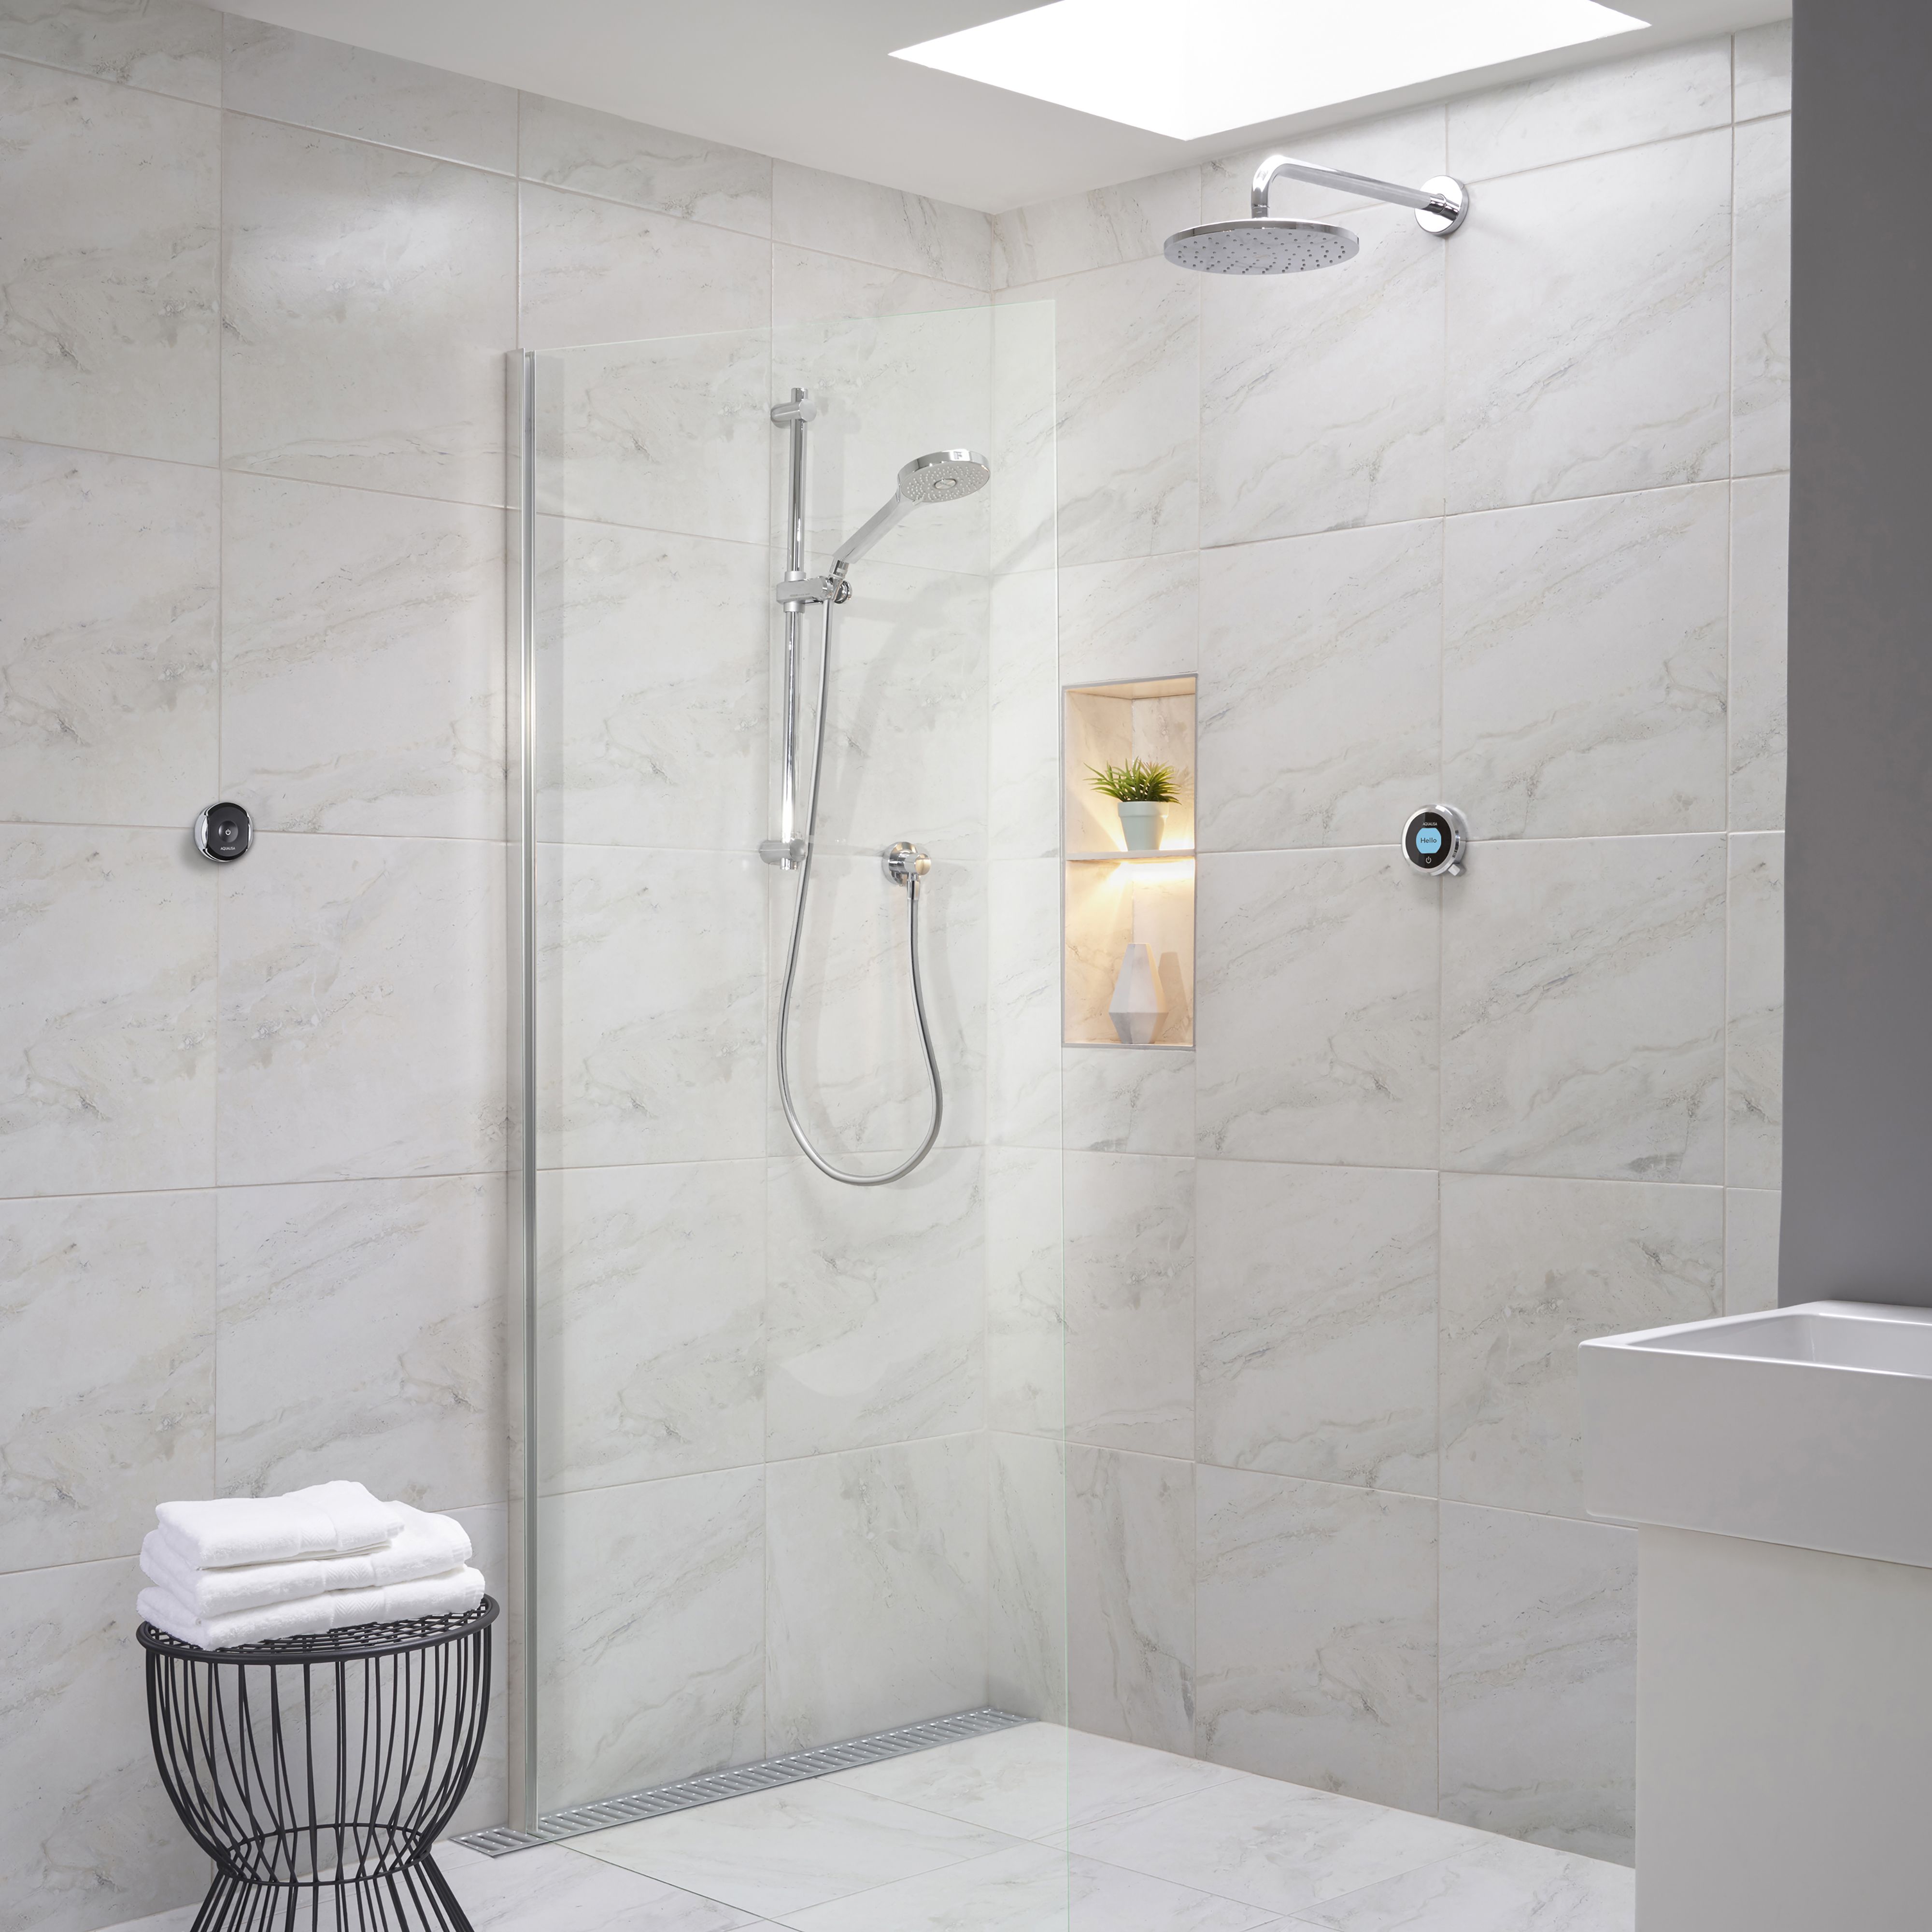 Aqualisa Optic Q Concealed valve HP/Combi Wall fed Smart Digital mixer Shower with Adjustable & Wall-fixed head